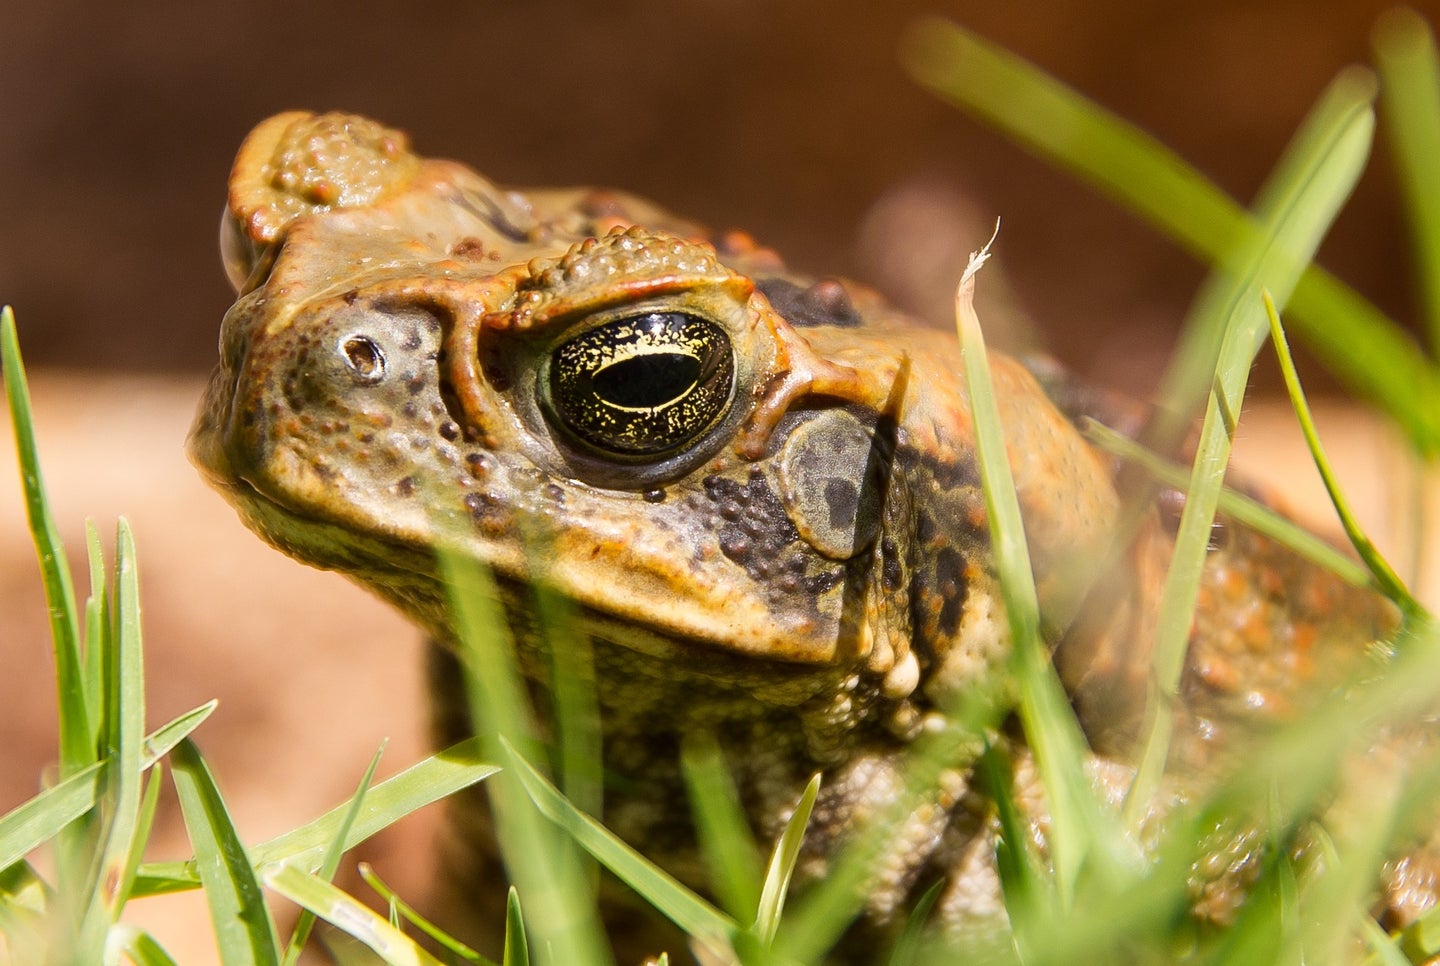 Close-up of a cane toad sitting in grass